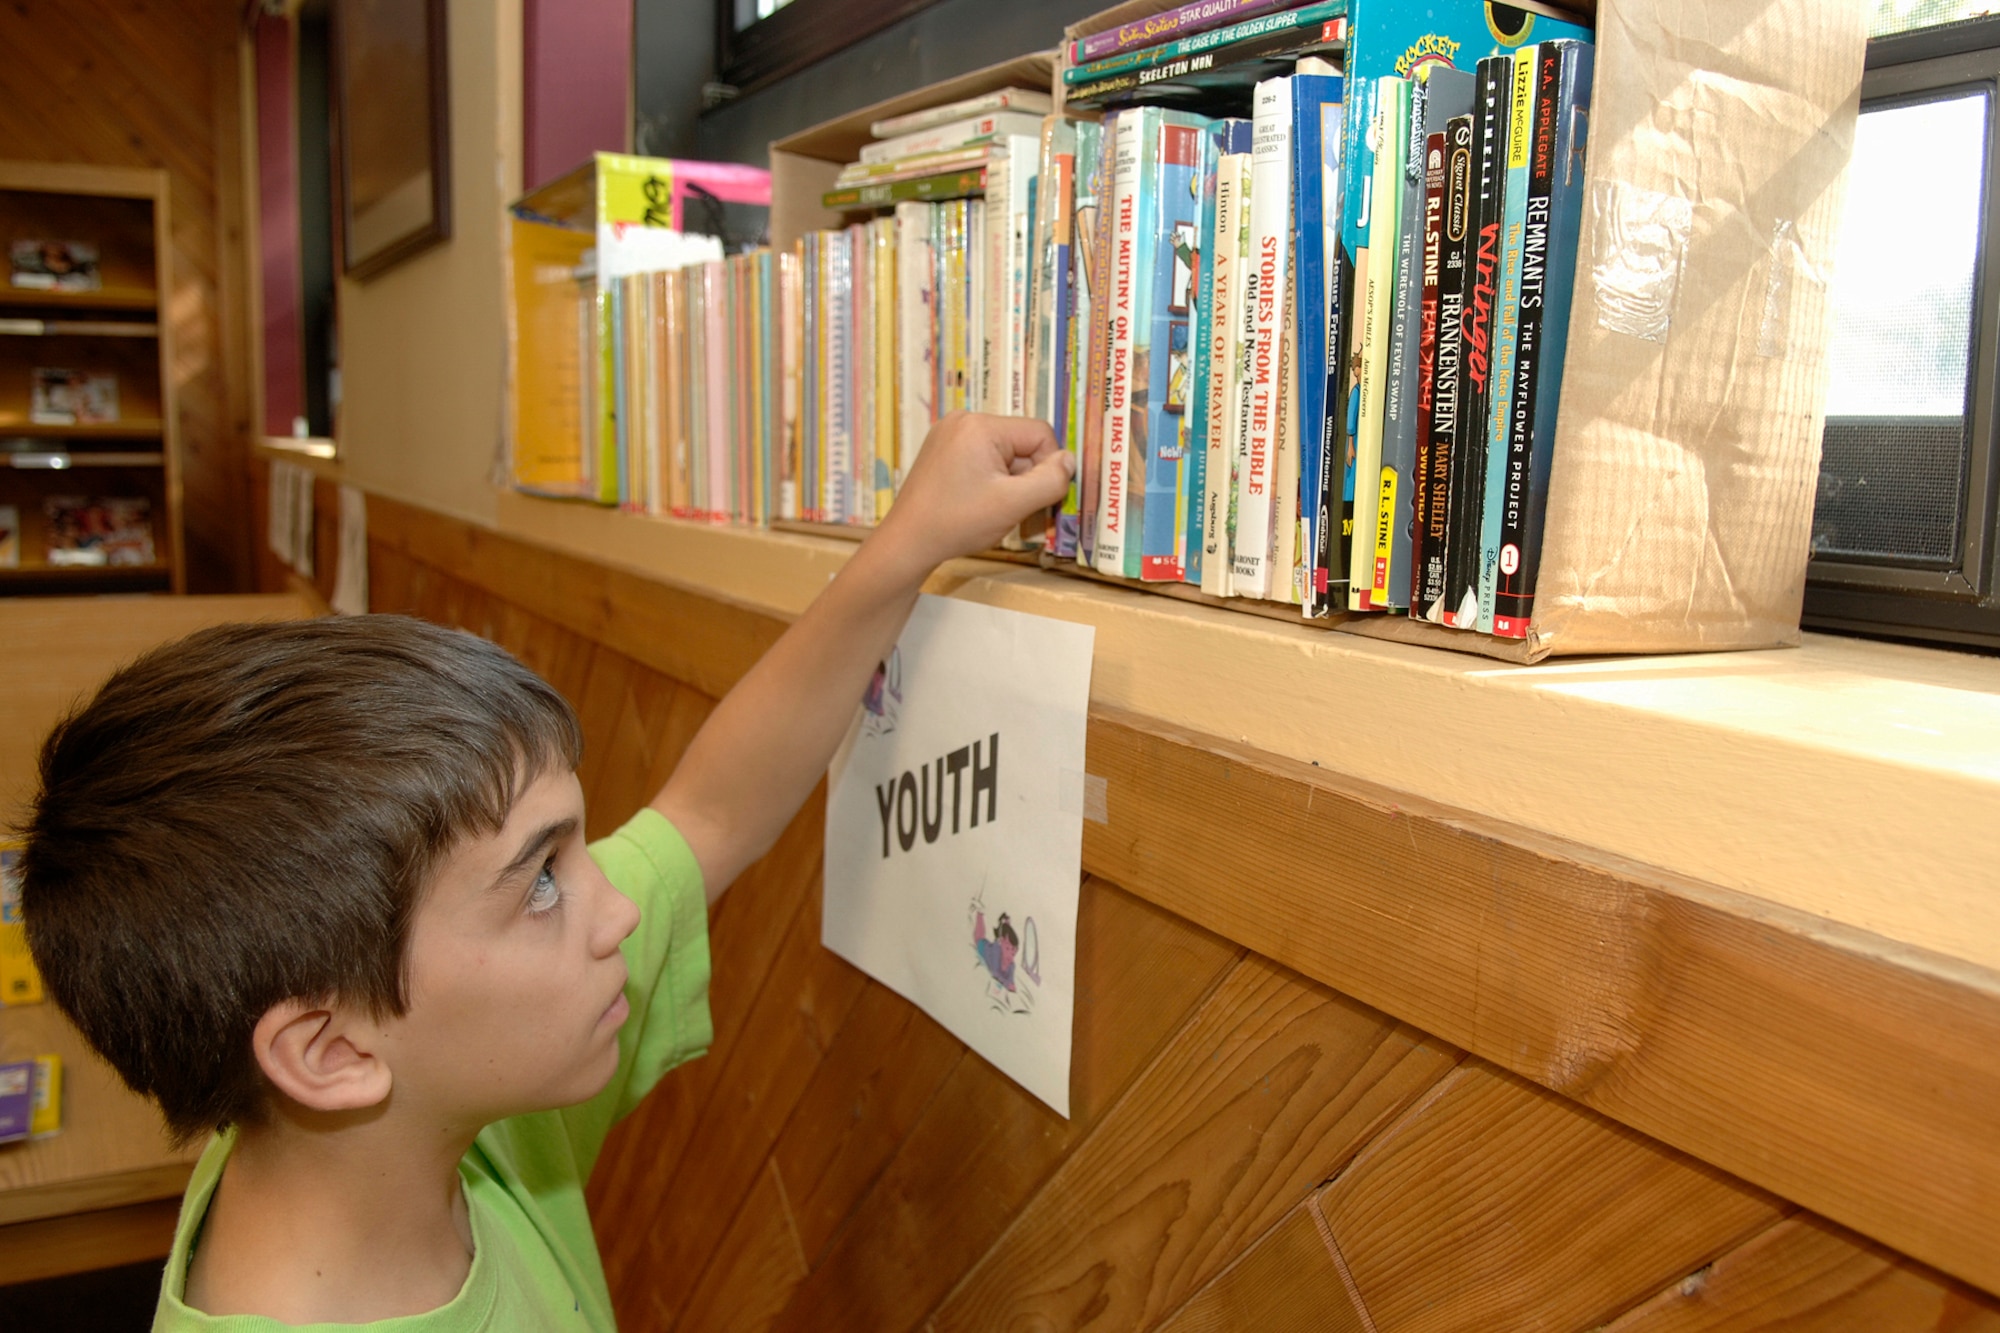 HANSCOM AFB, Mass. -- Scott Armfield, 9, reaches for a book on display during a book fair at the Base Library Oct. 17. (U.S. Air Force photo by Jan Abate)

